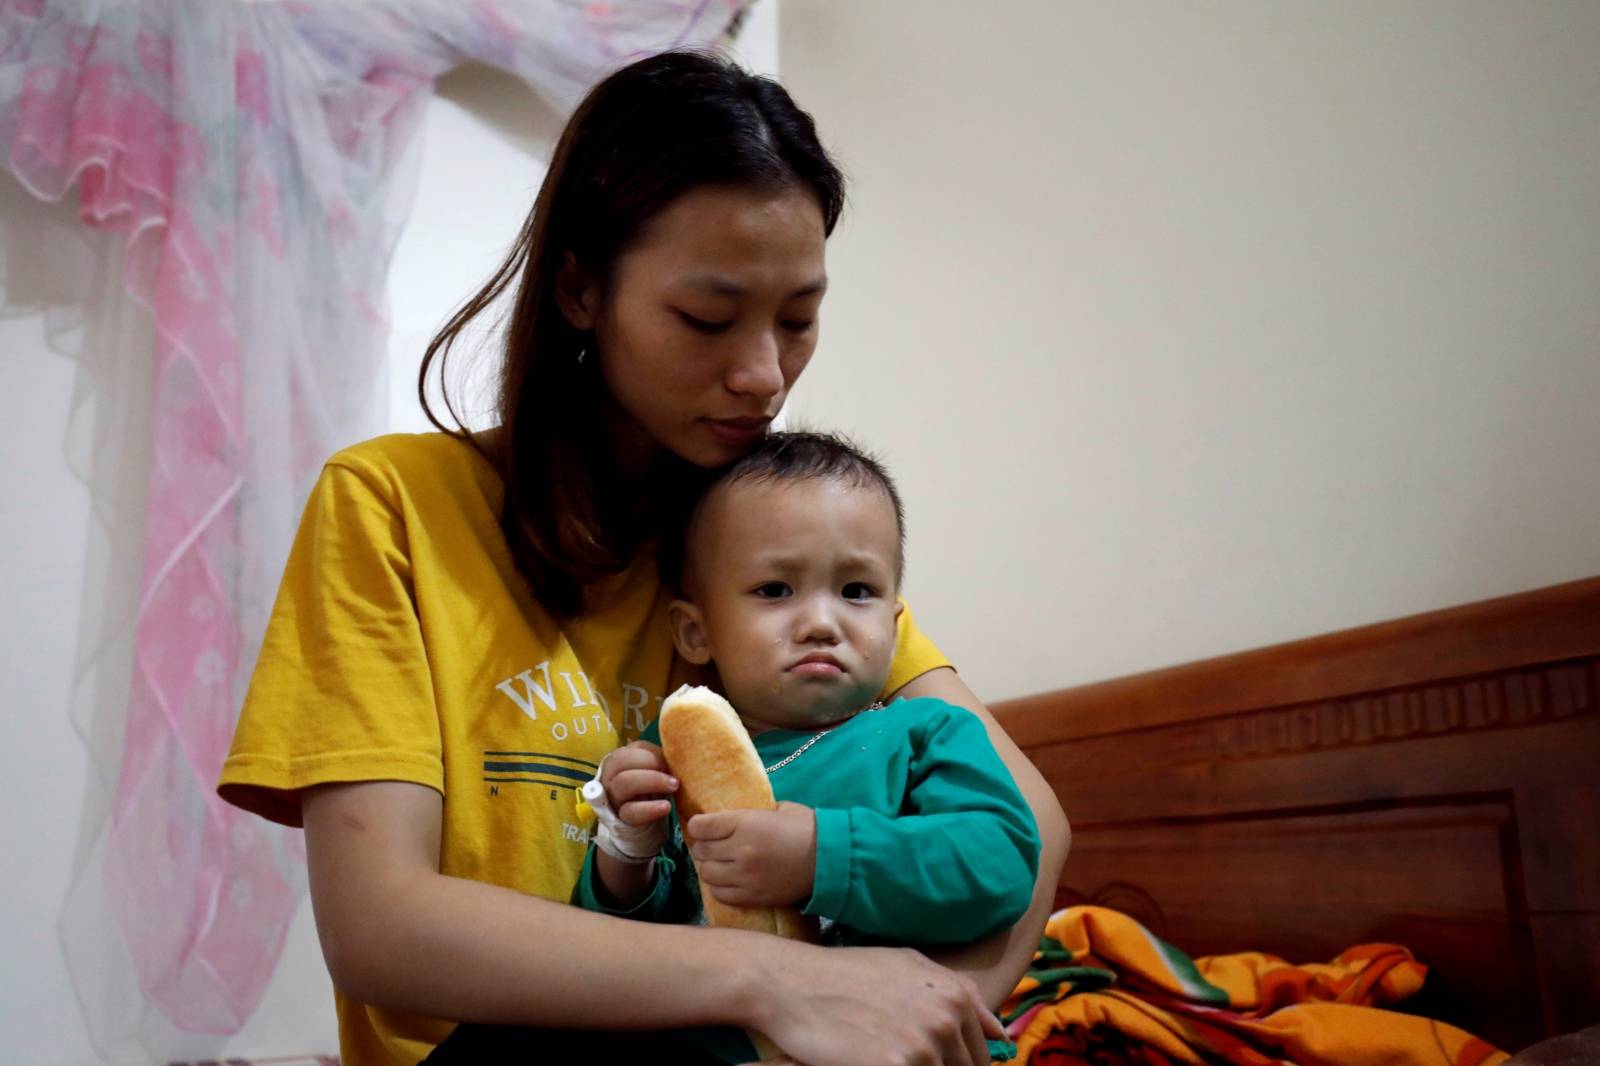 Hoang Thi Thuong, wife of Nguyen Dinh Tu, a Vietnamese suspected to be among dead victims found in a lorry in Britain, holds her son Nguyen Dinh Dan at their home in Nghe An province